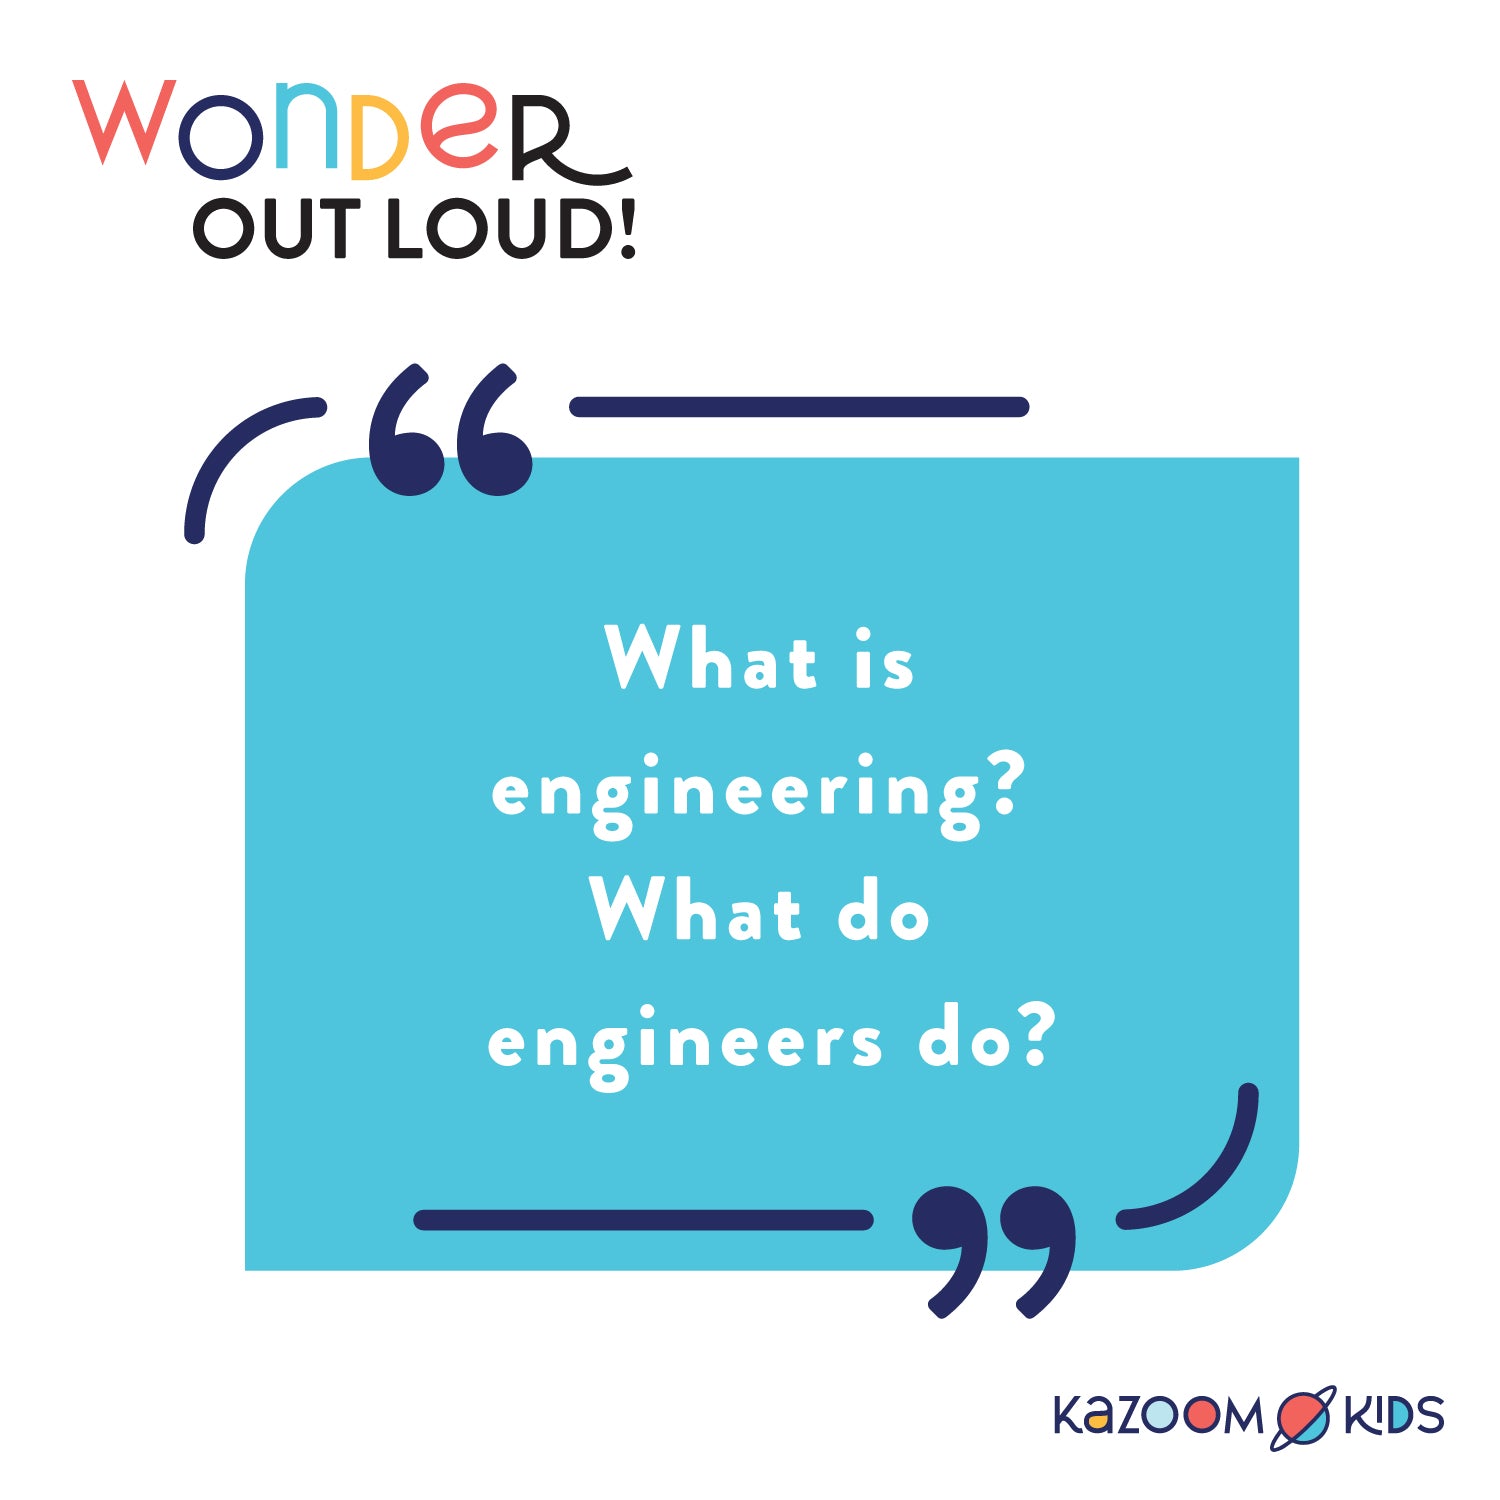 What is engineering? What do engineers do?